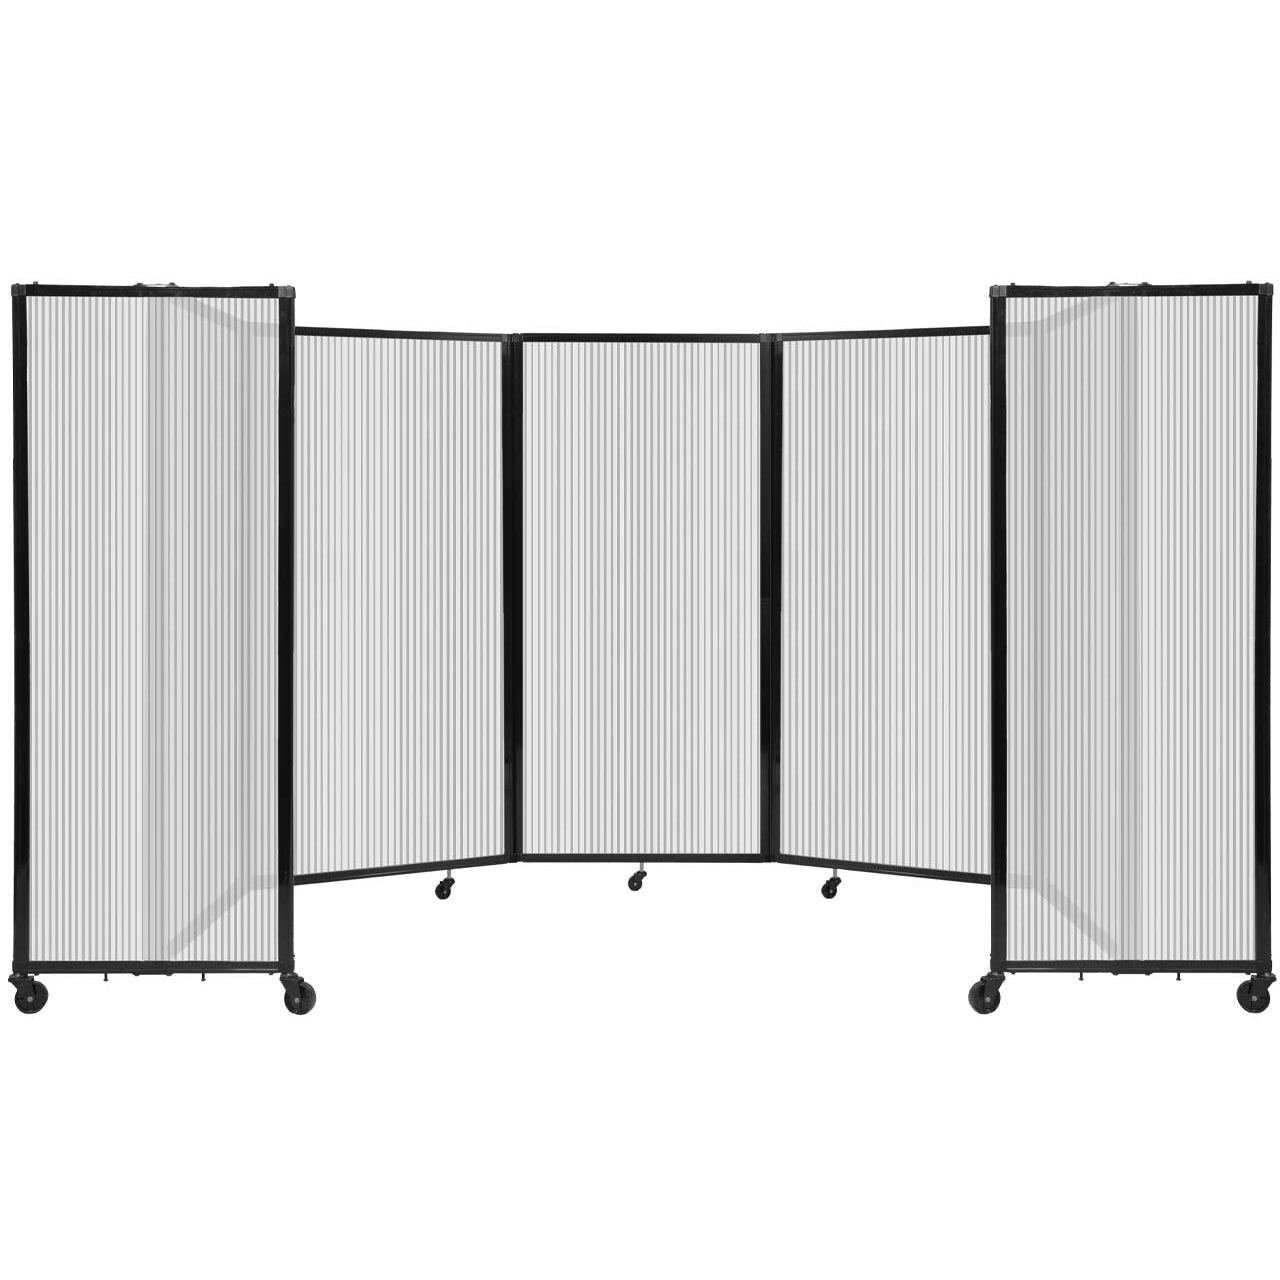 Room Divider 360° Folding Portable Partition with Fluted Polycarbonate Panels, 14' W x 6' H